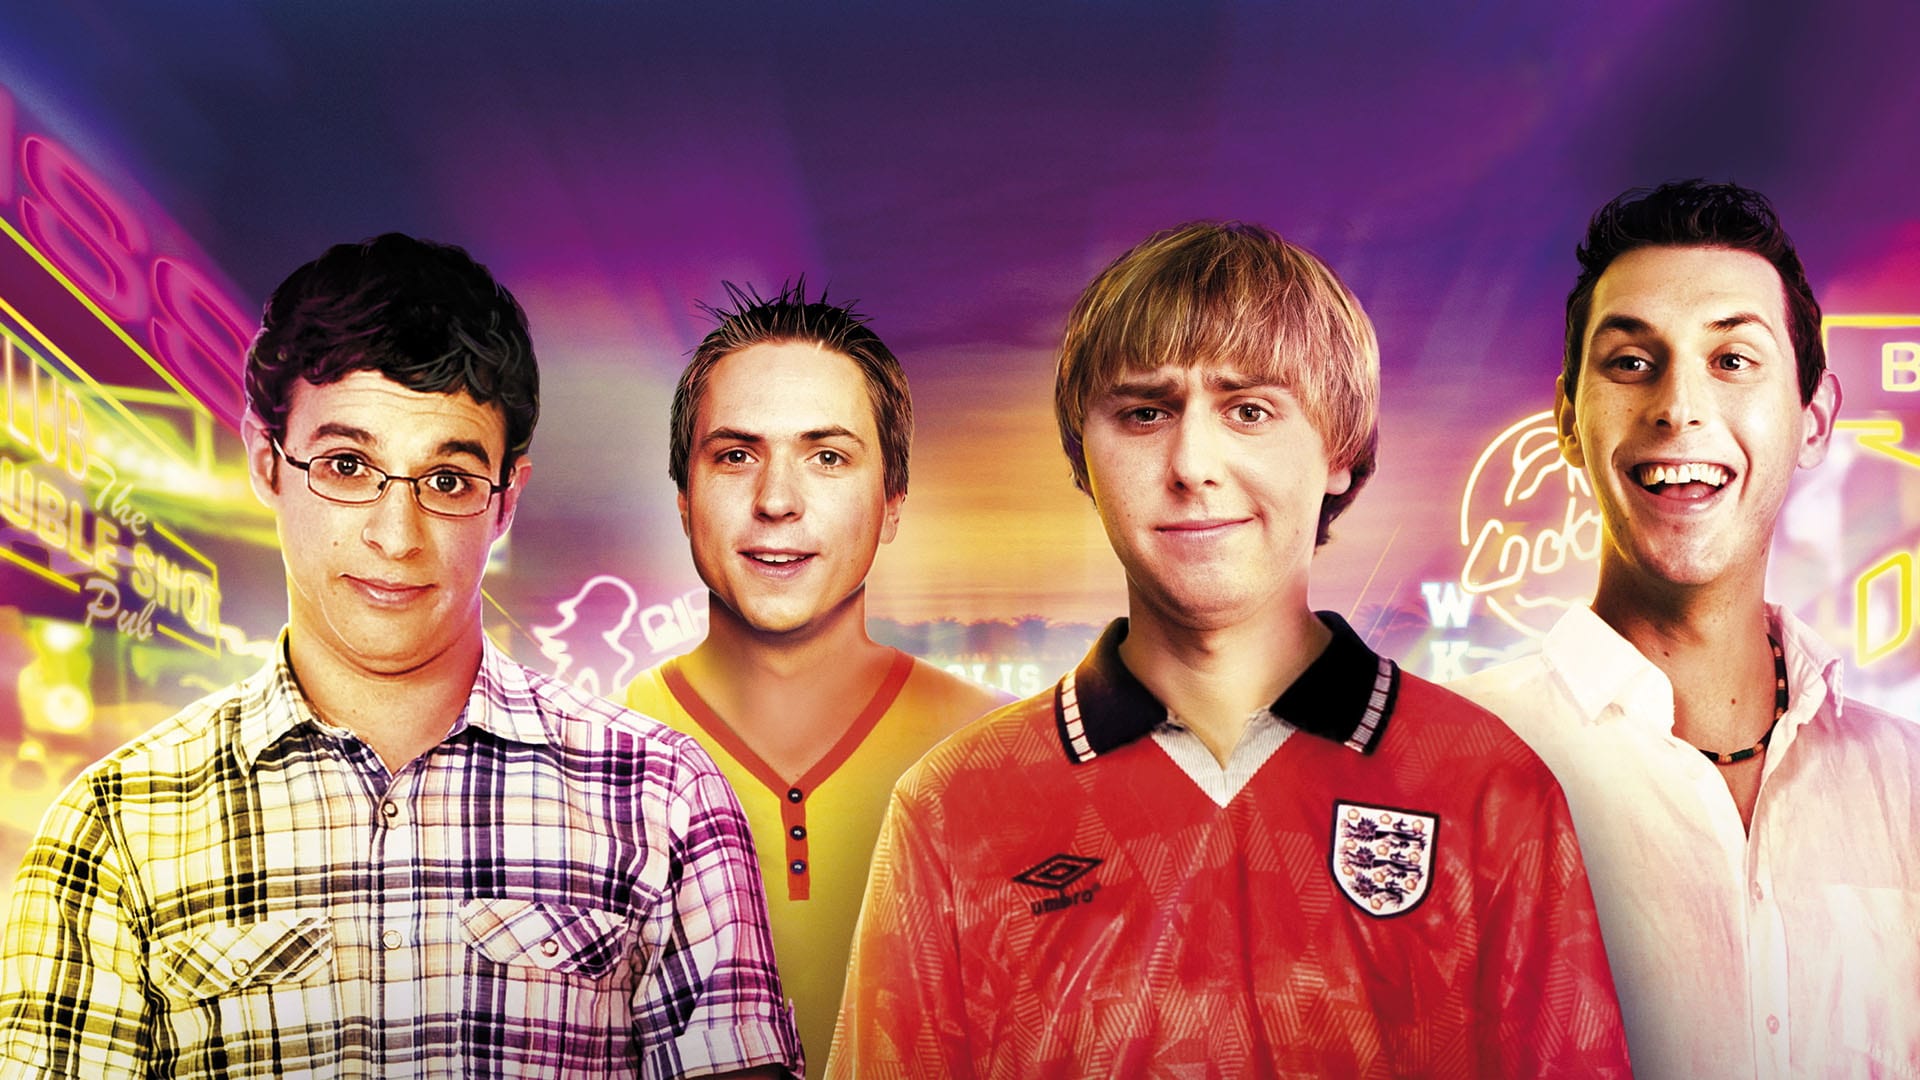 The Inbetweeners Movie © Bwark Productions, Film4 Productions, Young Films